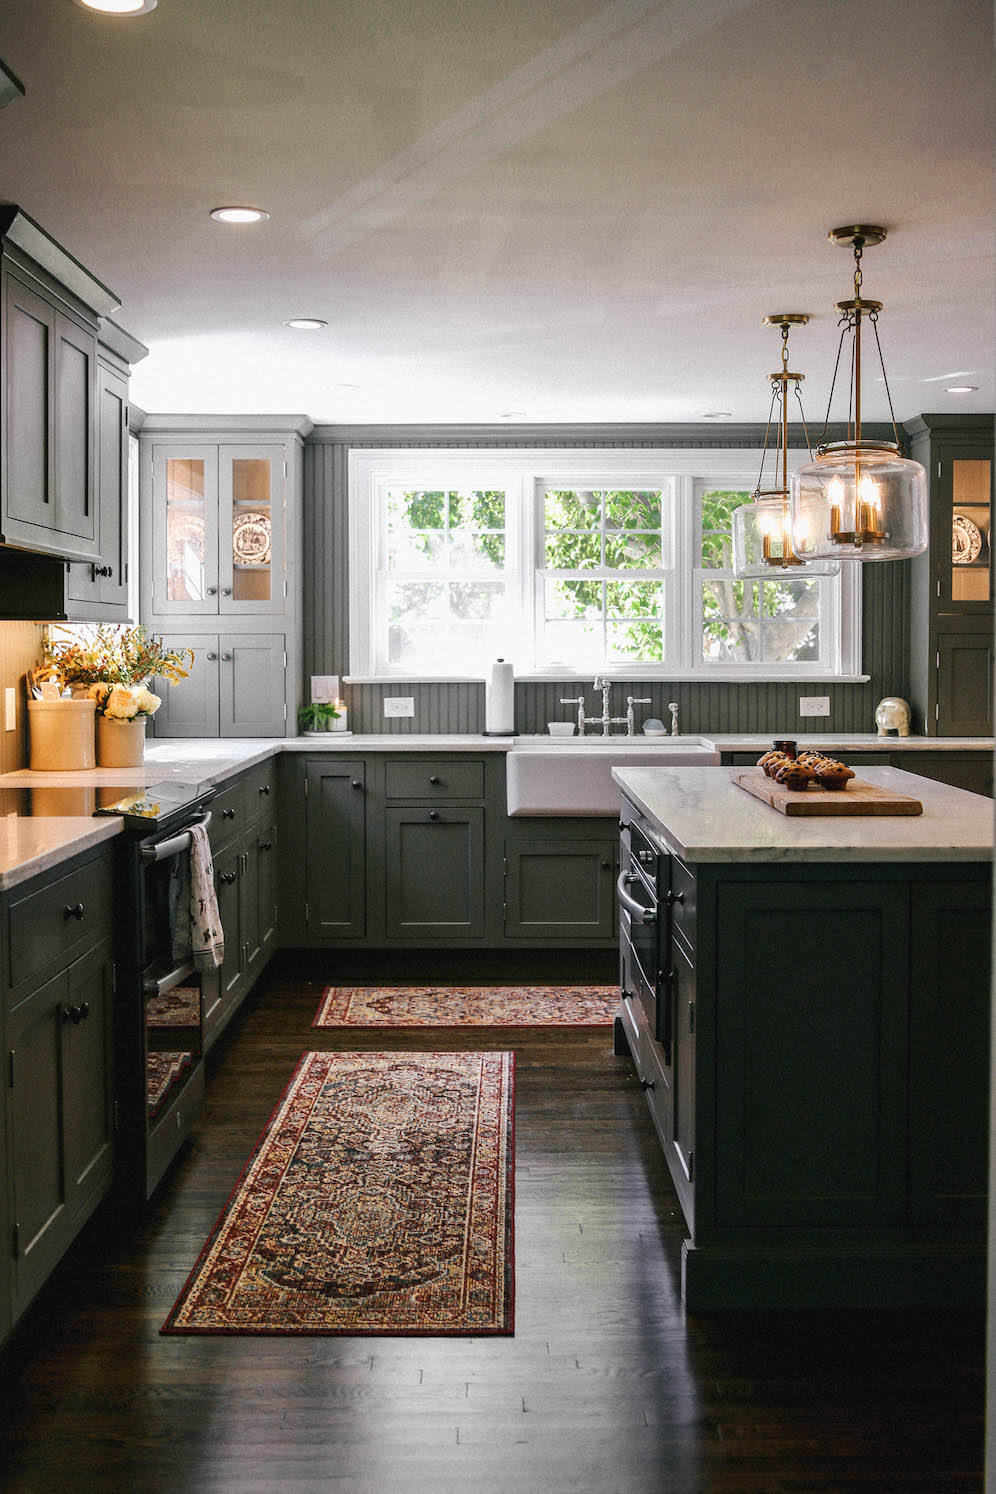 Everything You Need To Know About Farmhouse Sinks & Kitchen Hardware The Coastal Confidence by Aubrey Yandow